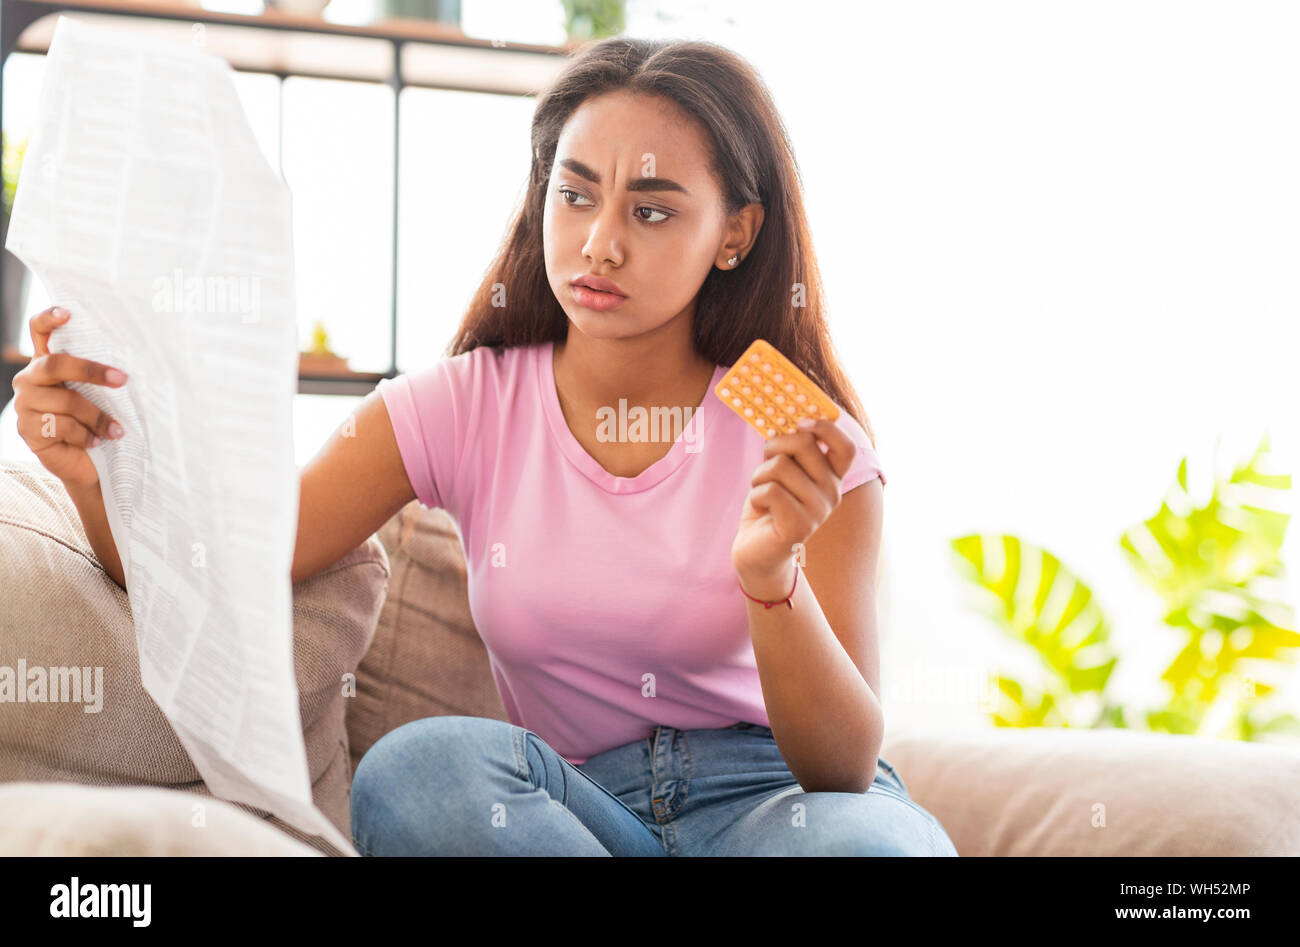 Shocked african american girl reading leaflet before taking contraceptive pills Stock Photo